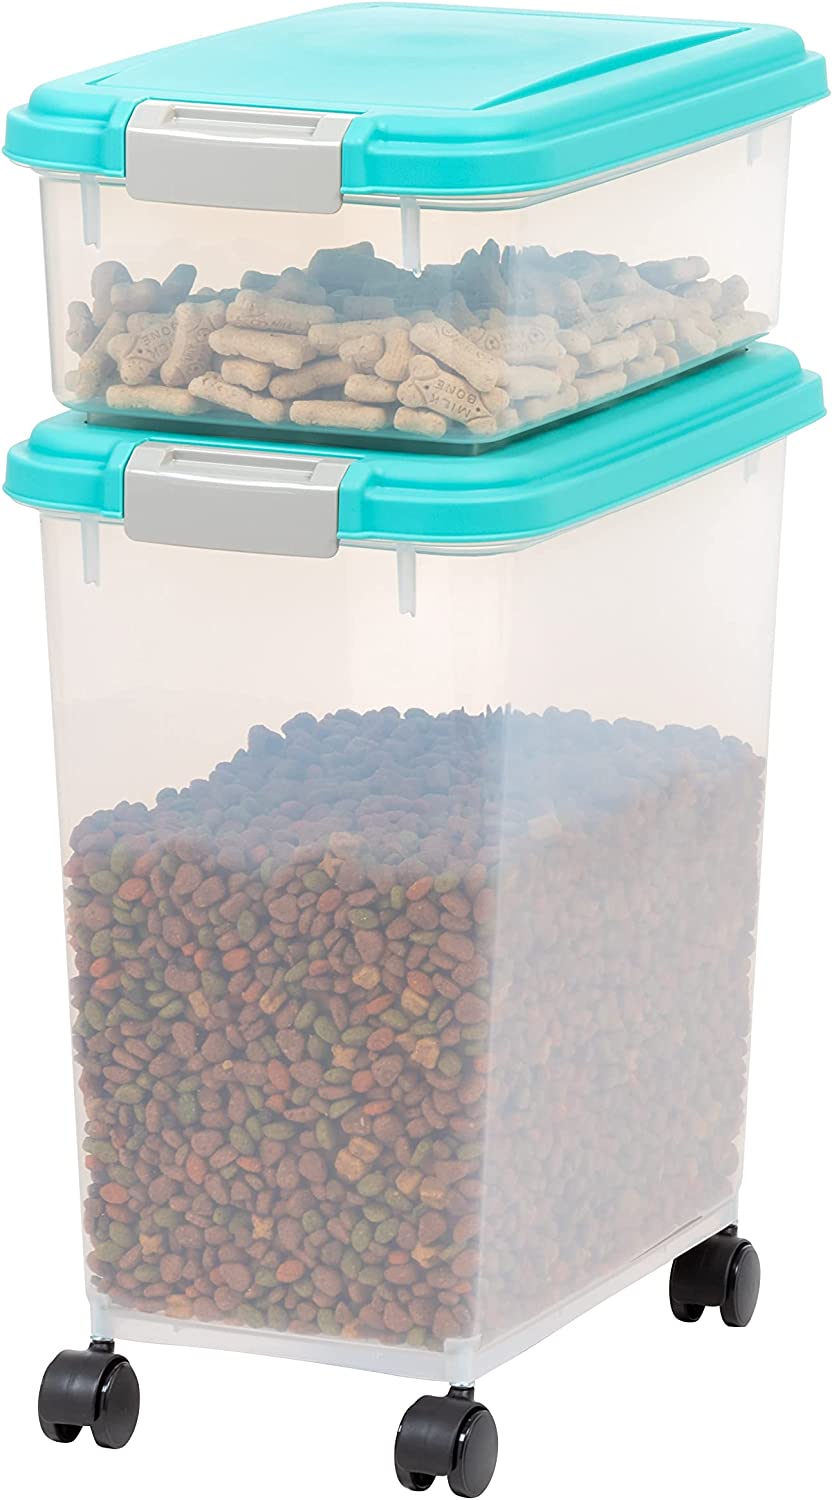 Iris dog food storage container, stackable dog food storage container